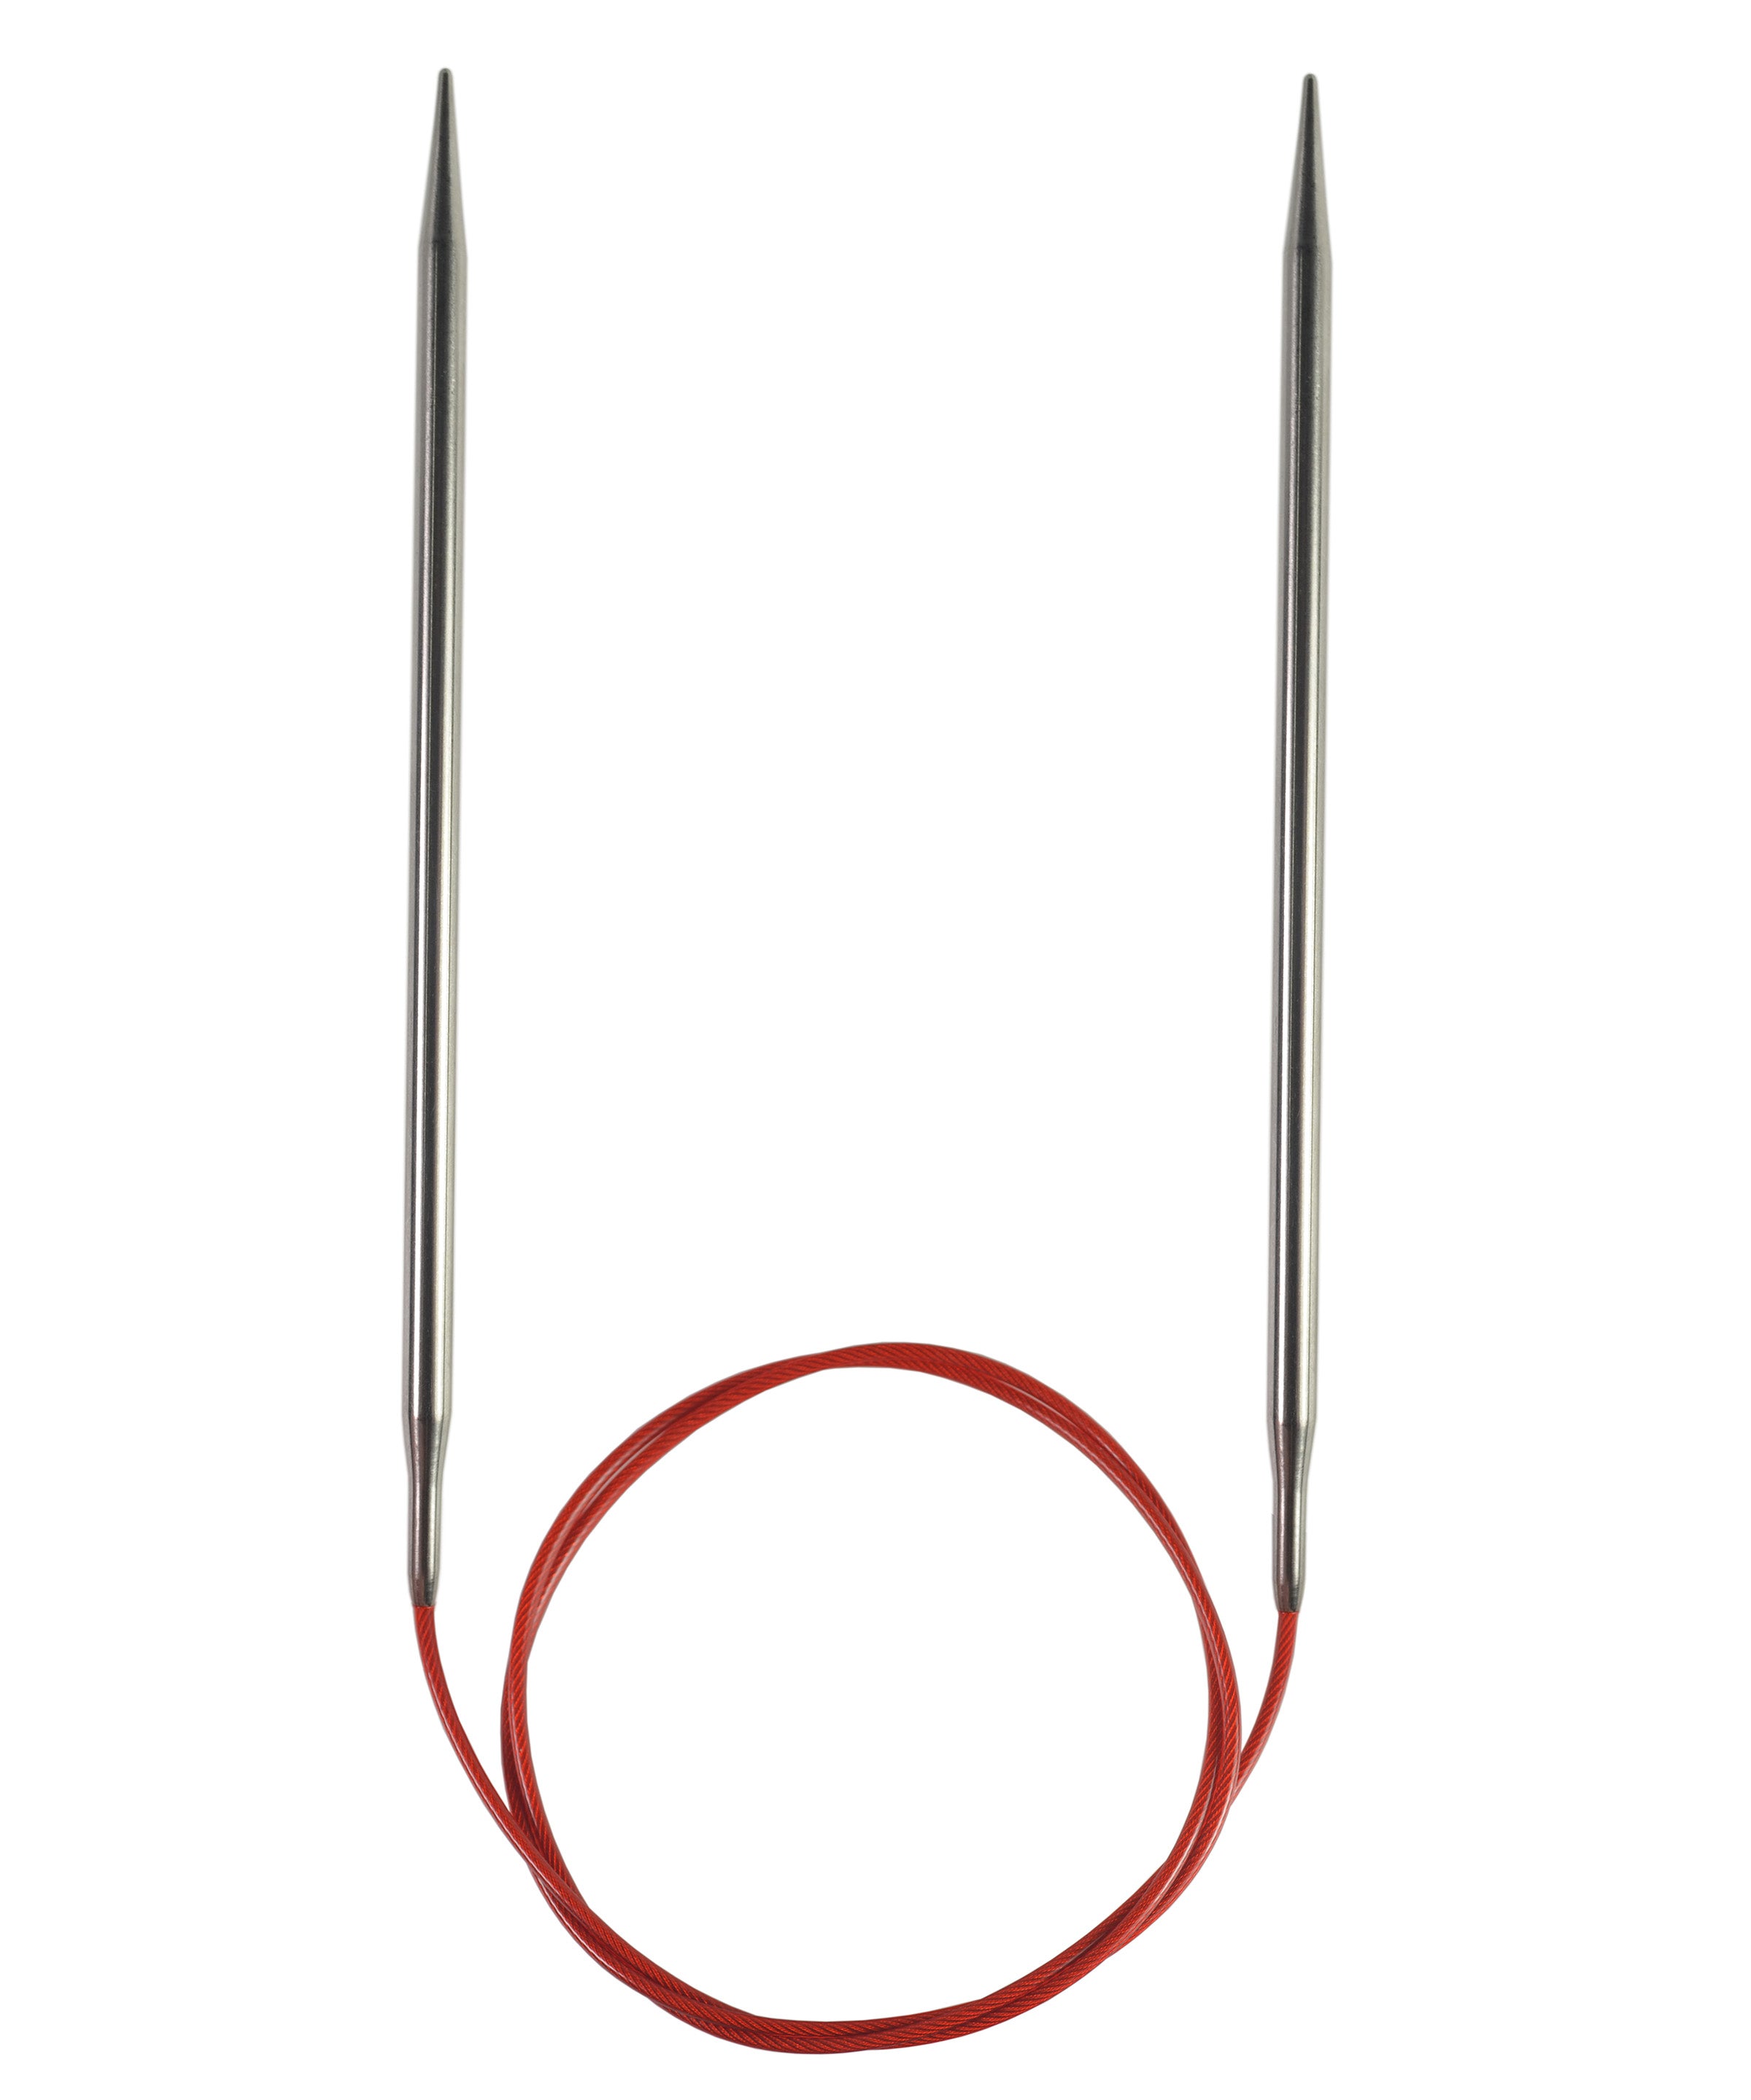 ChiaoGoo Knitting Needles Red Lace Circular, Pointy Stainless Steel Needles  for Fast Knitting, Multi-Strand Coated